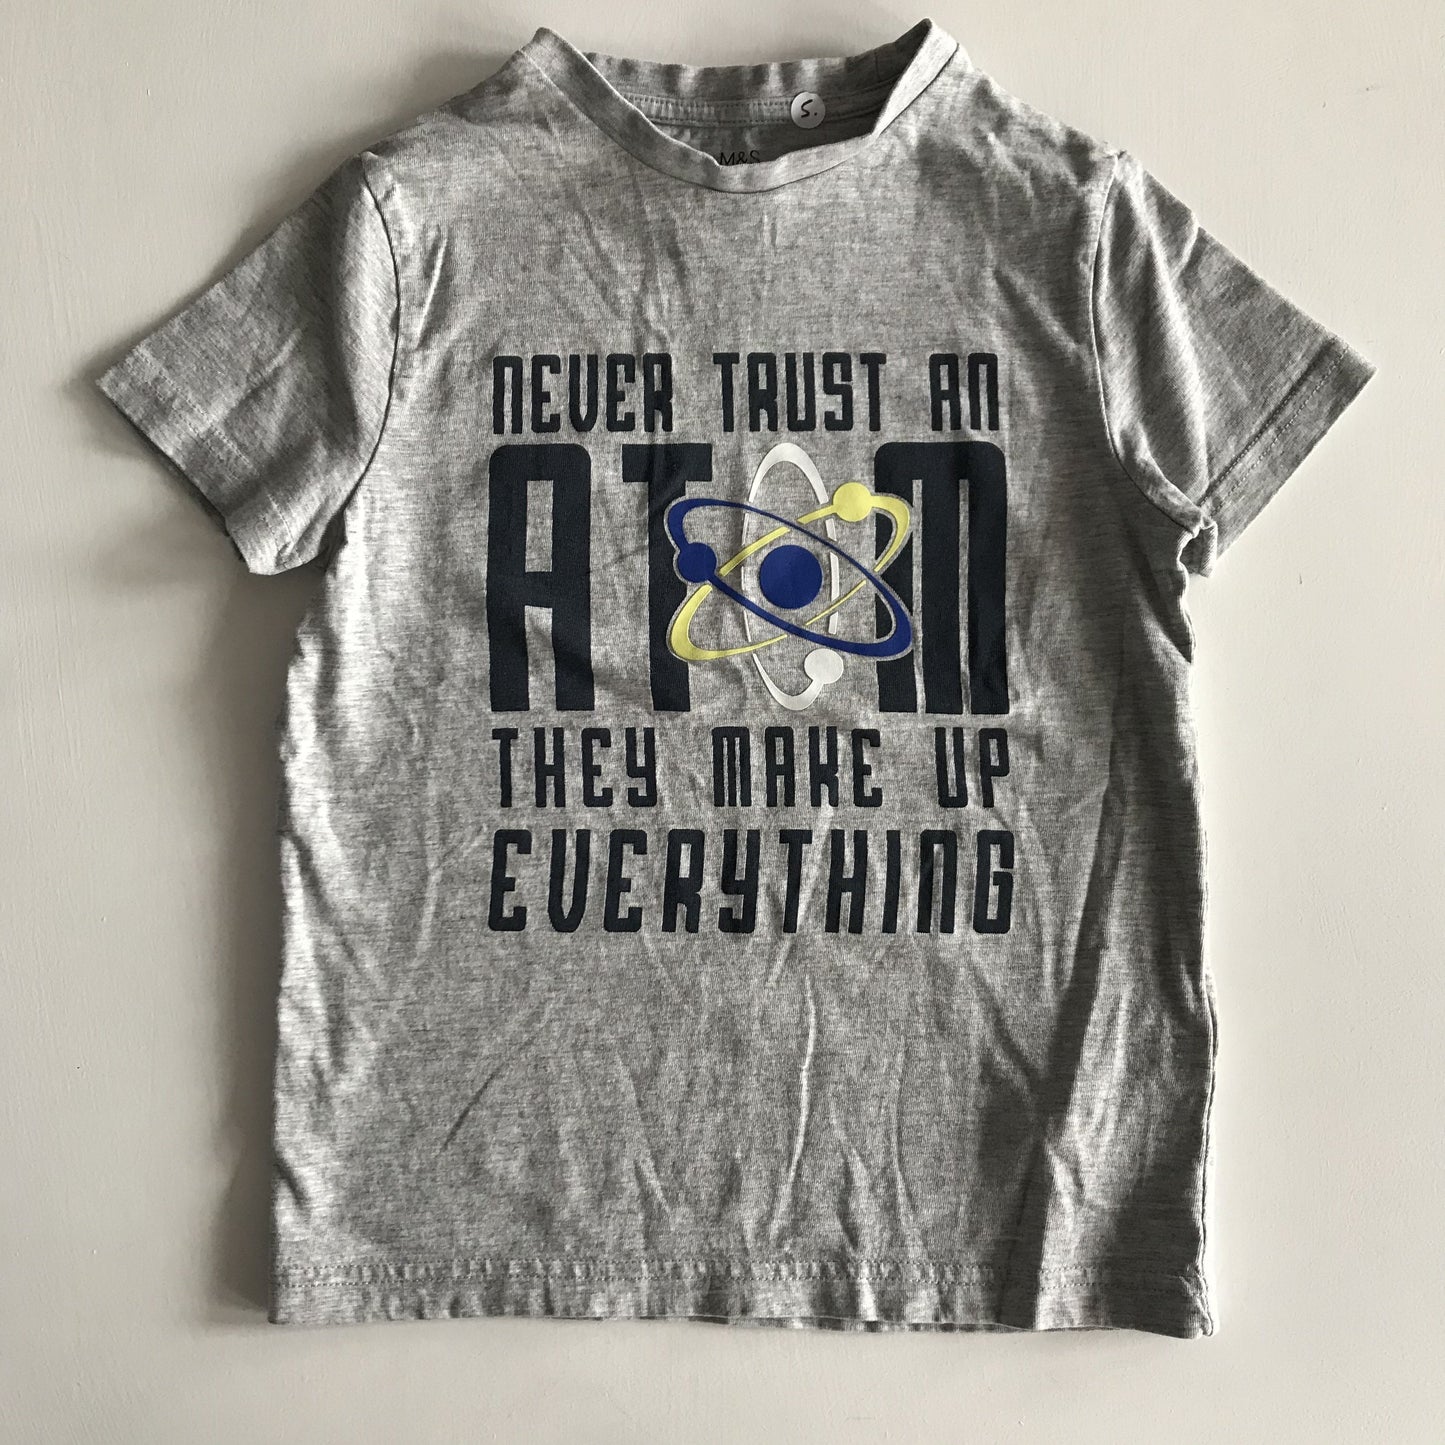 T-shirt - 'Never Trust an Atom, They Make Up Everything' - Age 5